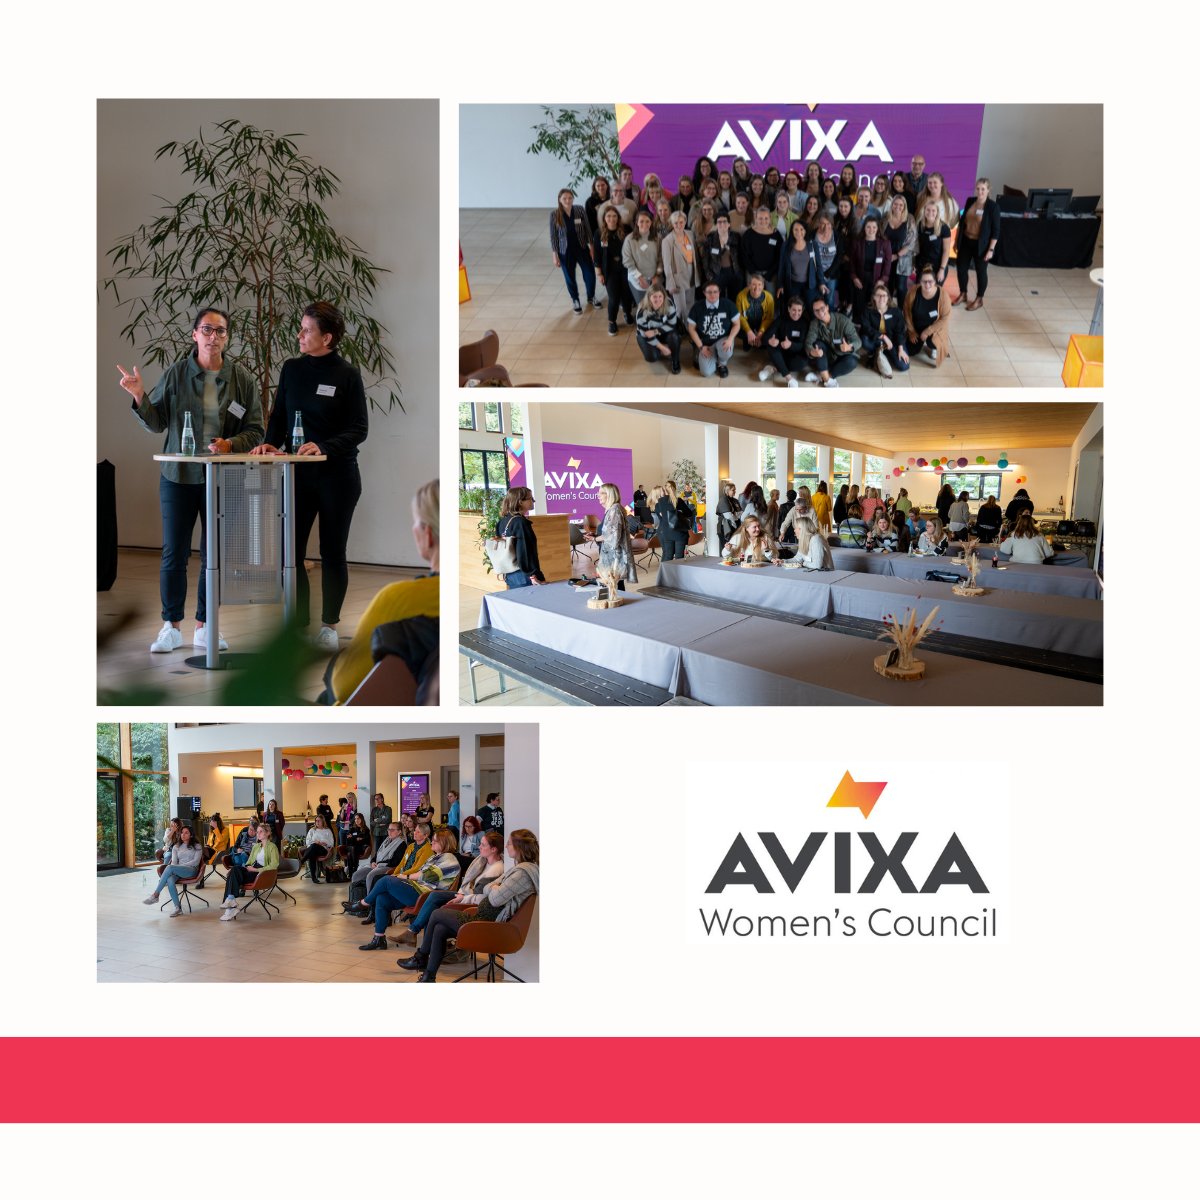 First in-person DACH AVIXA Women's Council meetup since '21/'22 launch! 🙌 Hosted by LANG AG (sponsored by Shure), it united Germany. Next: Feb 1, ISE's AVIXA Xchange LIVE in Hall 4!